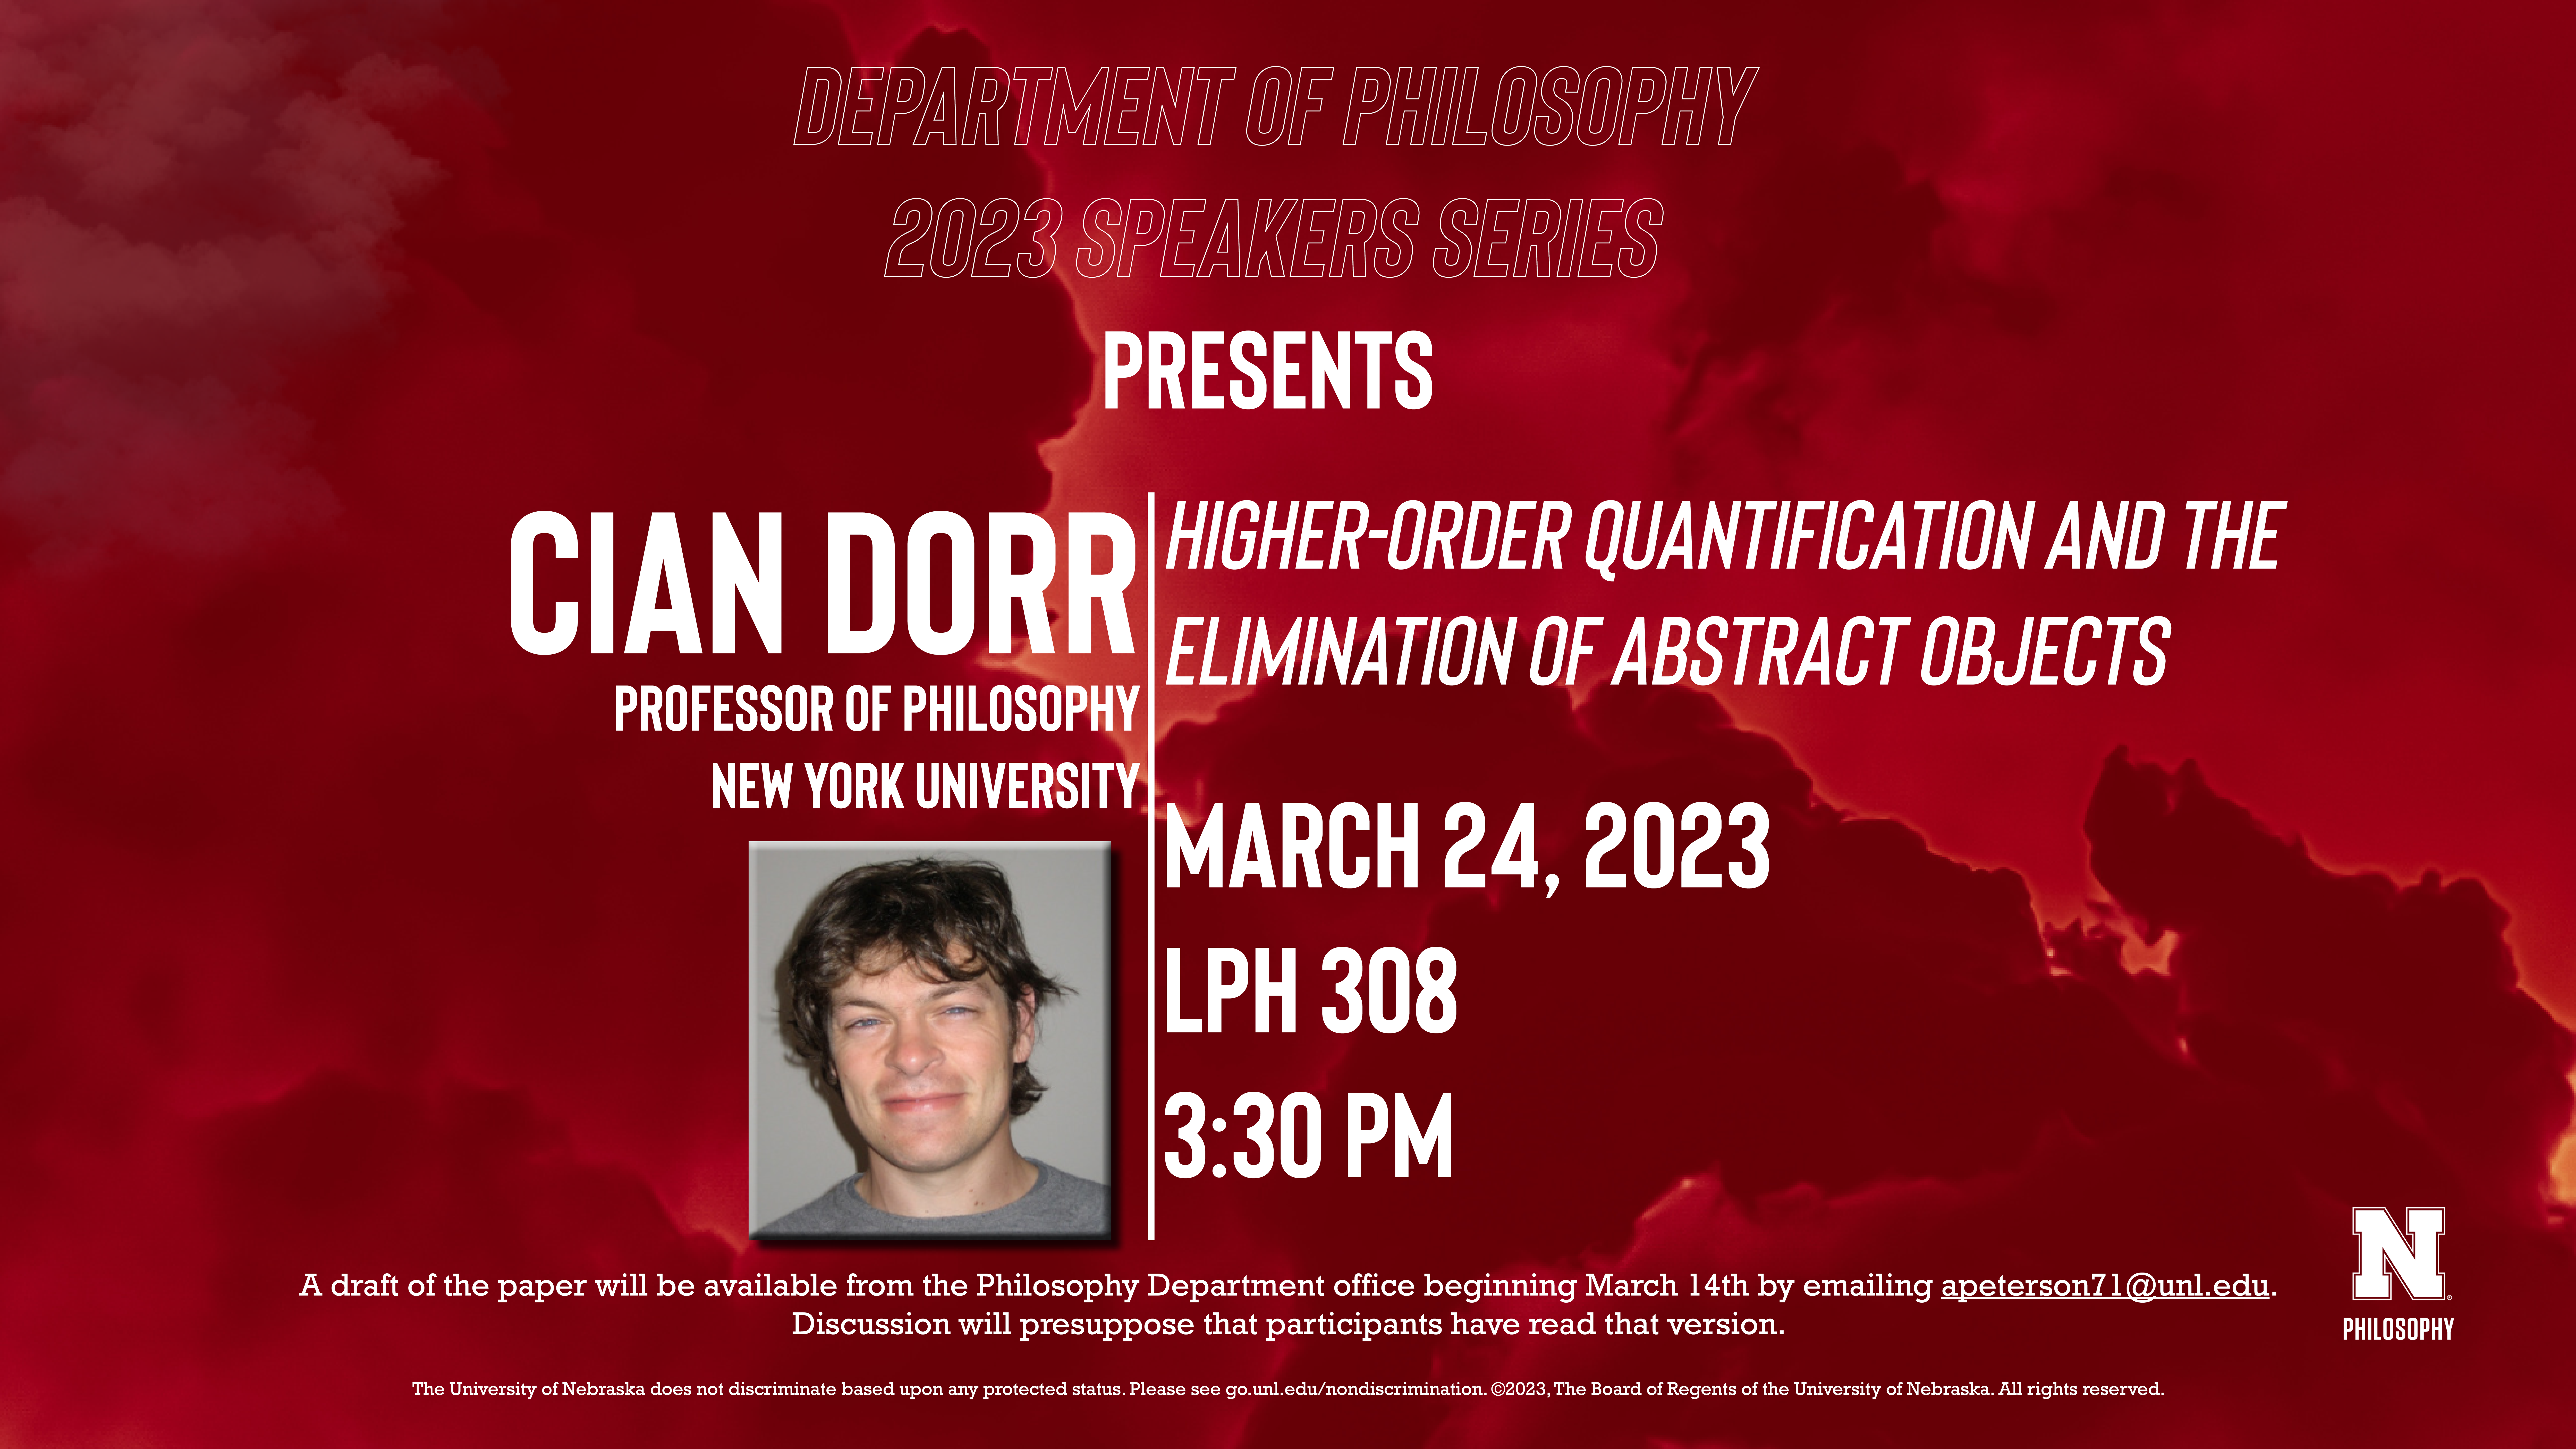 Philosophy Speaker Series: Cian Dorr on March 24th at 3:30 pm